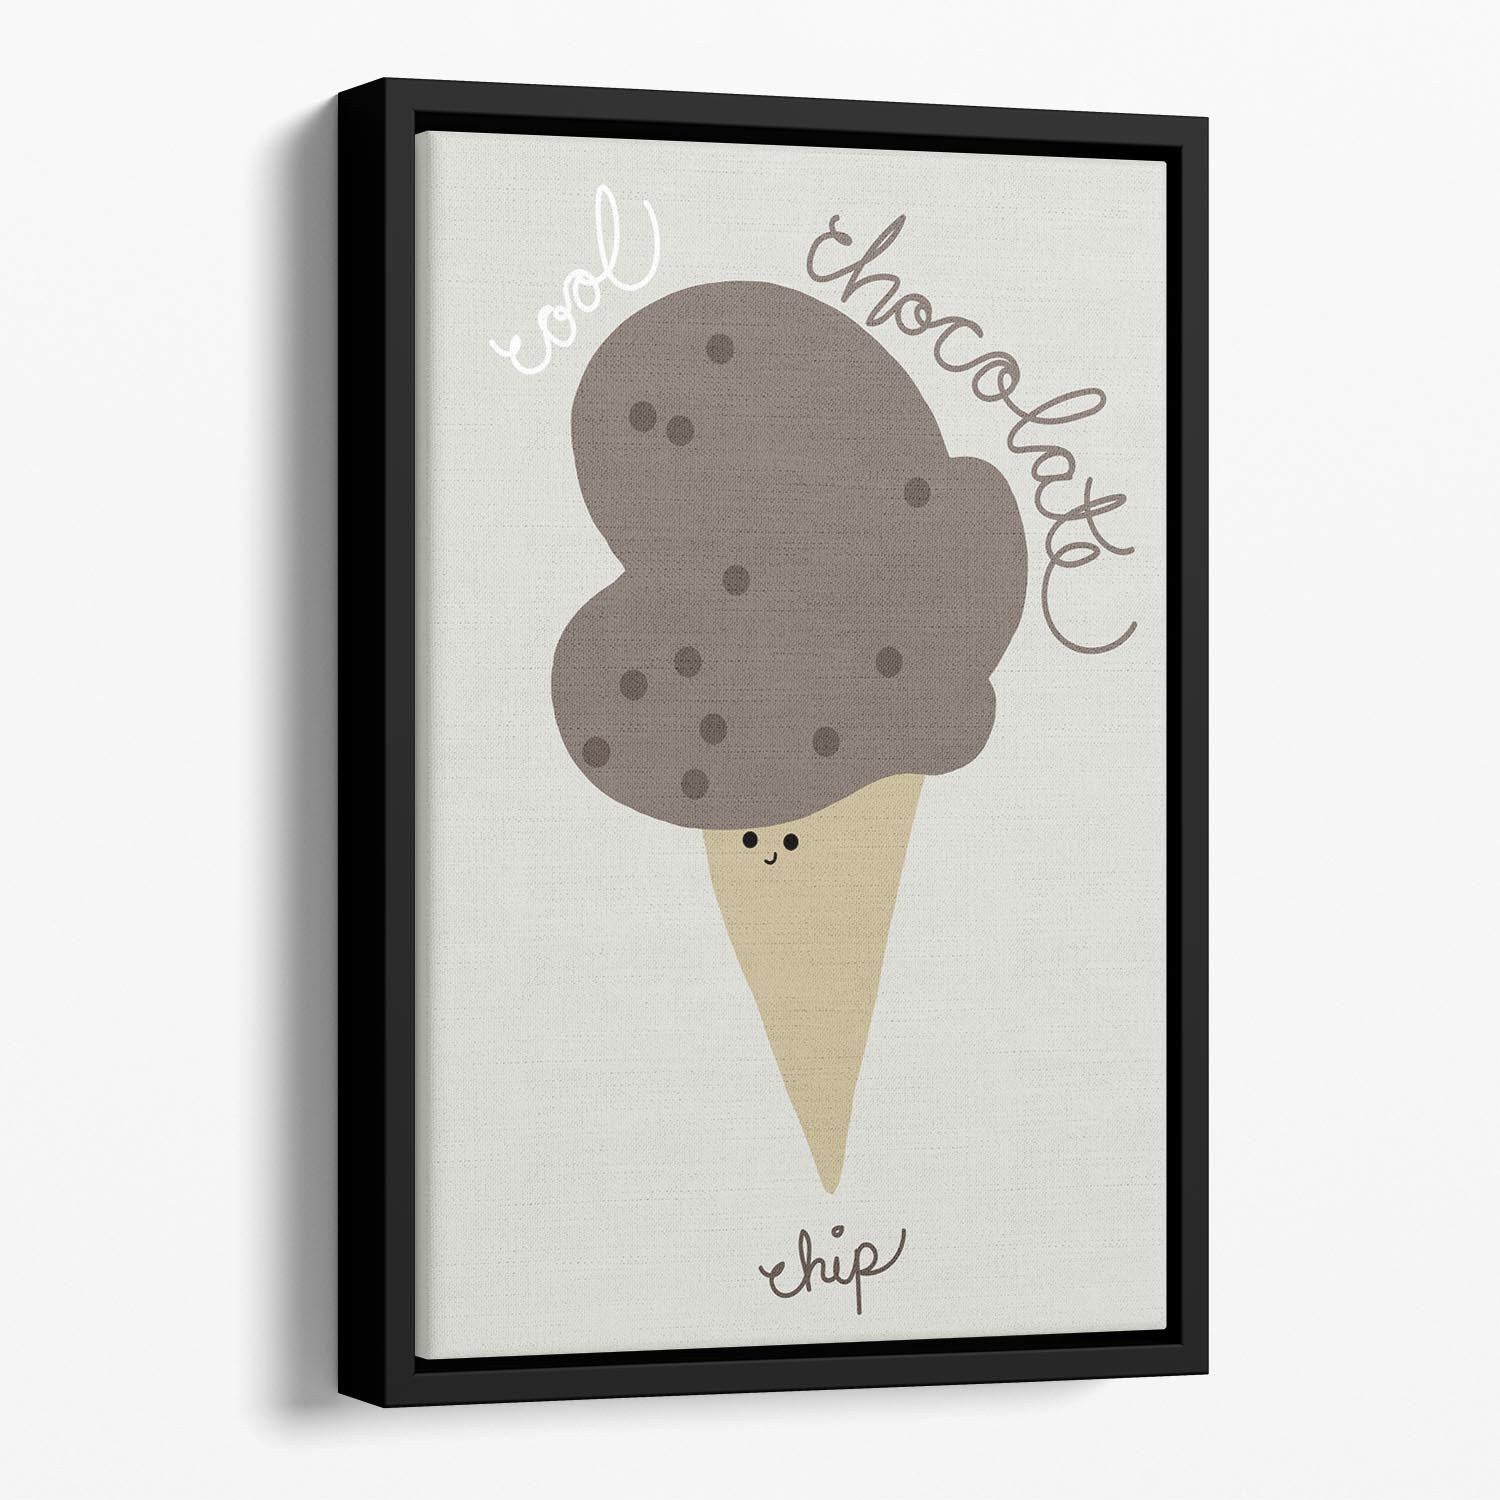 Chocolate Chip Floating Framed Canvas - 1x - 1